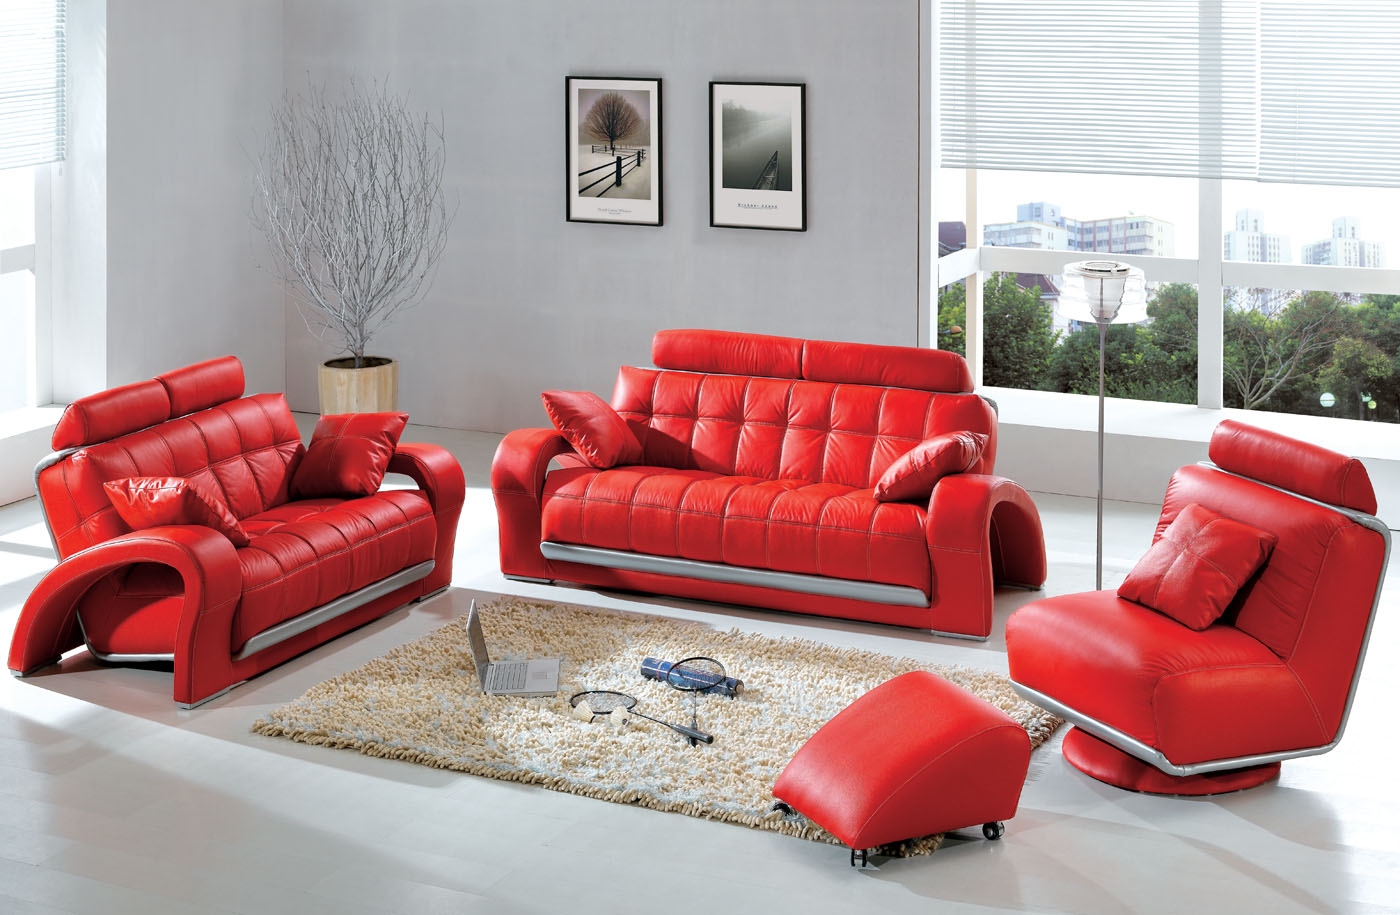 Simple red couch set with a cute ottoman